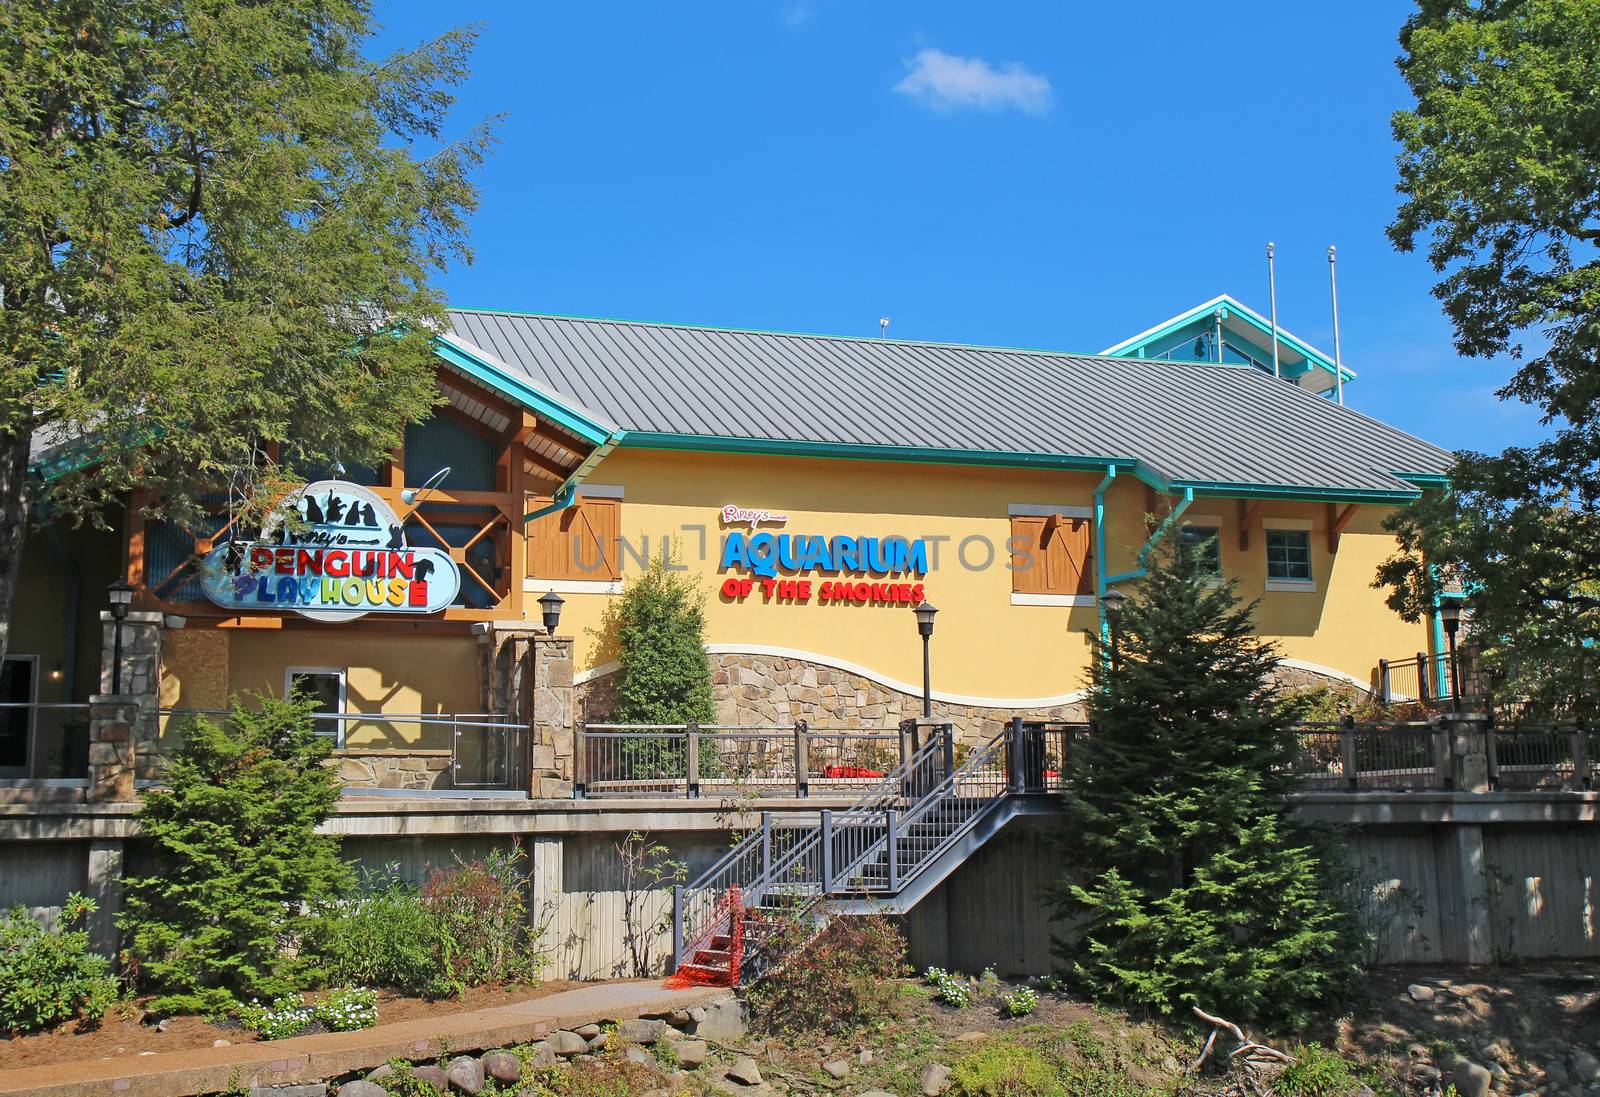 GATLINBURG, TENNESSEE - OCTOBER 6: The Aquarium of the Smokies in Gatlinburg, Tennessee, October 6, 2013. Gatlinburg is a major tourist destination and gateway to Great Smoky Mountains National Park.